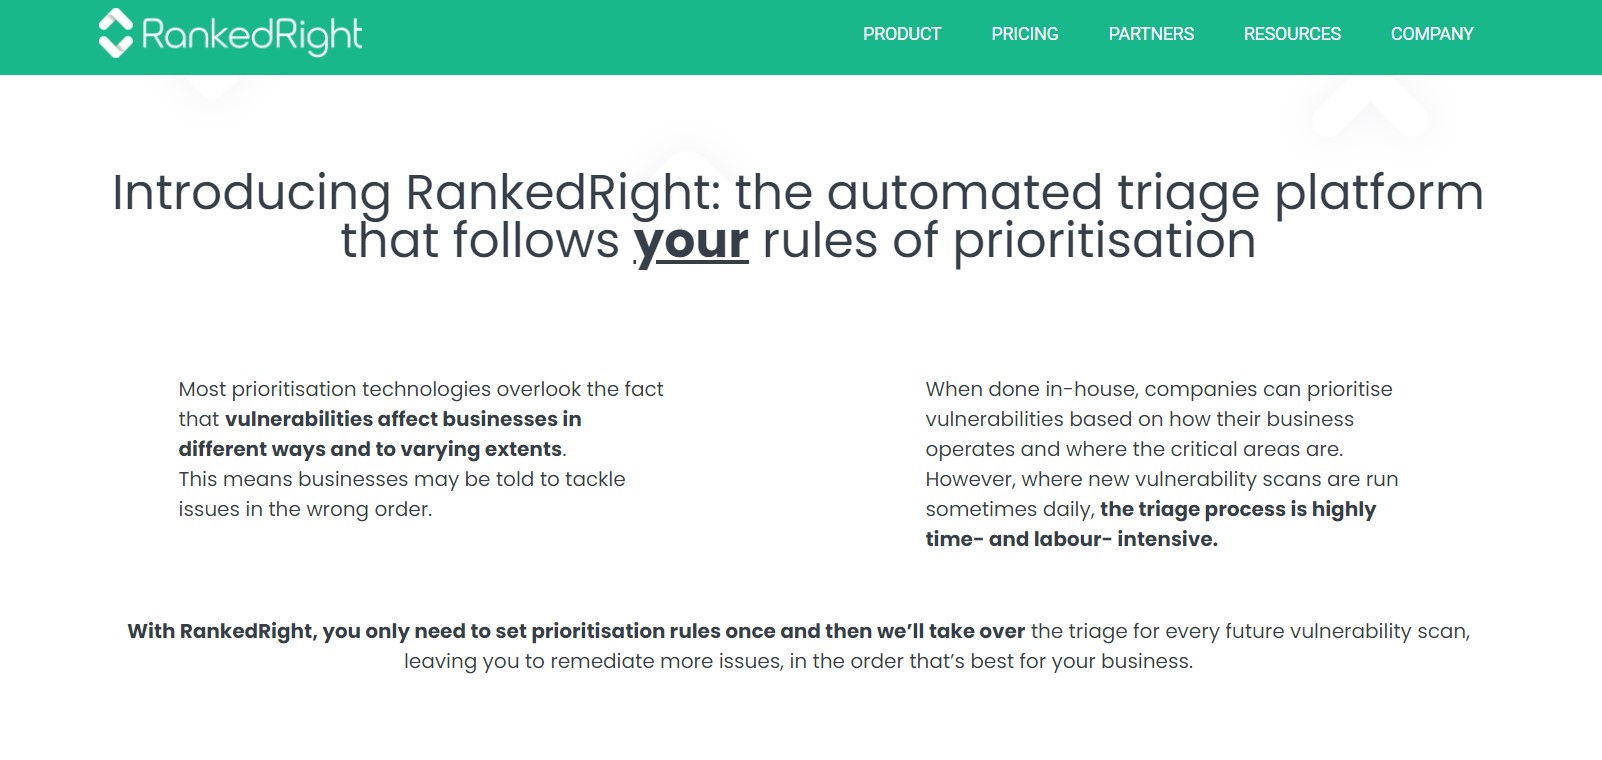 Get feedback from a vast remote working audience about RankedRight